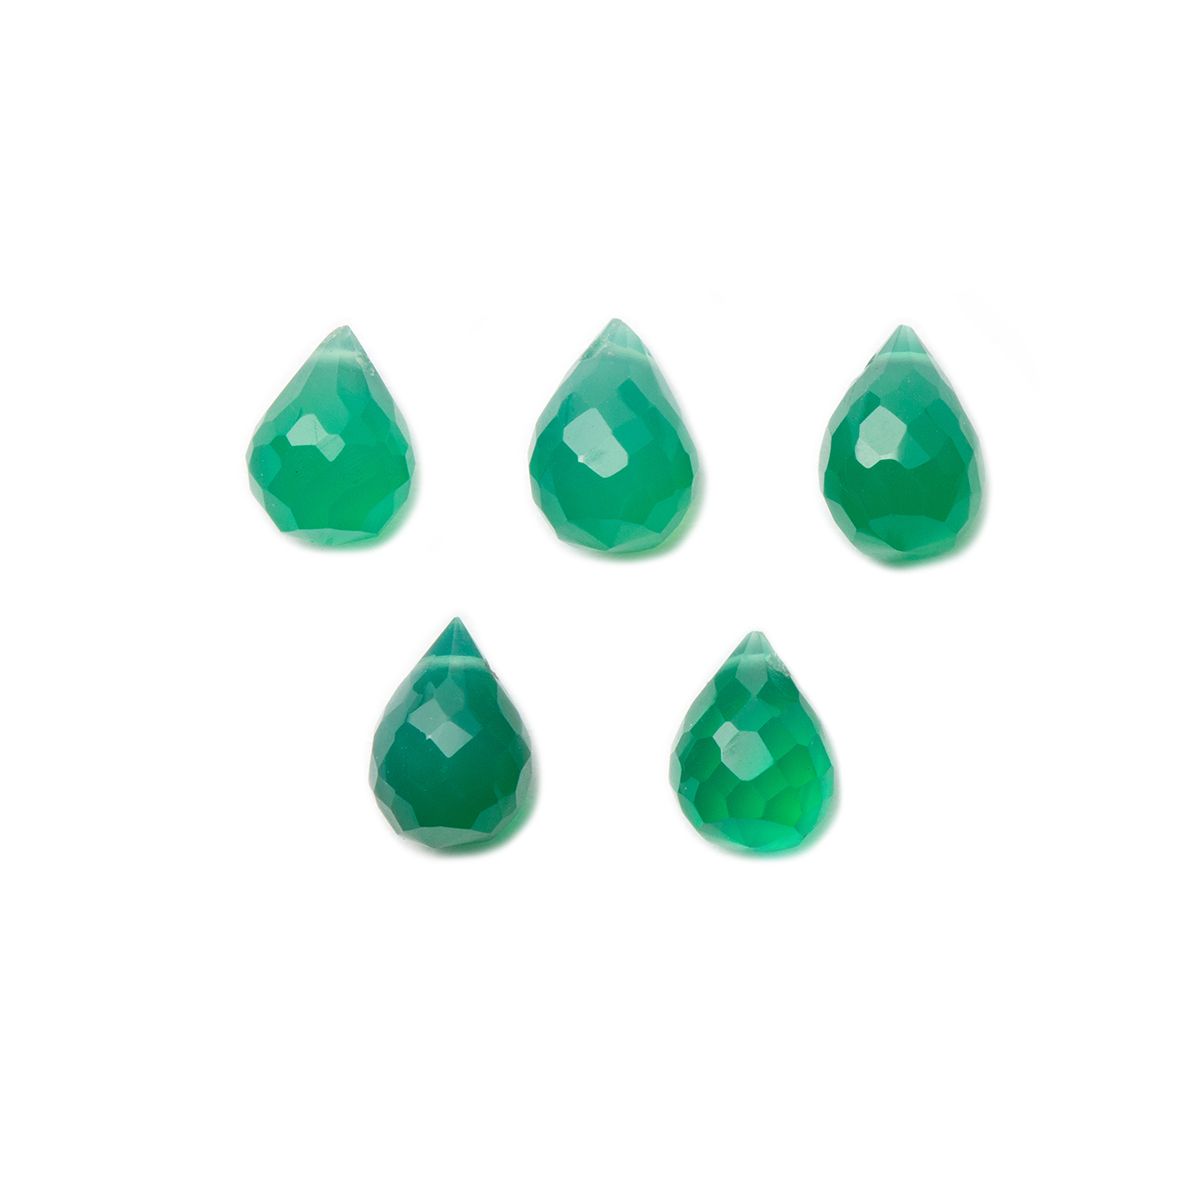 Green Onyx Faceted Drop Briolette Beads - Approx From 6mm, Pack Of 10 Beads